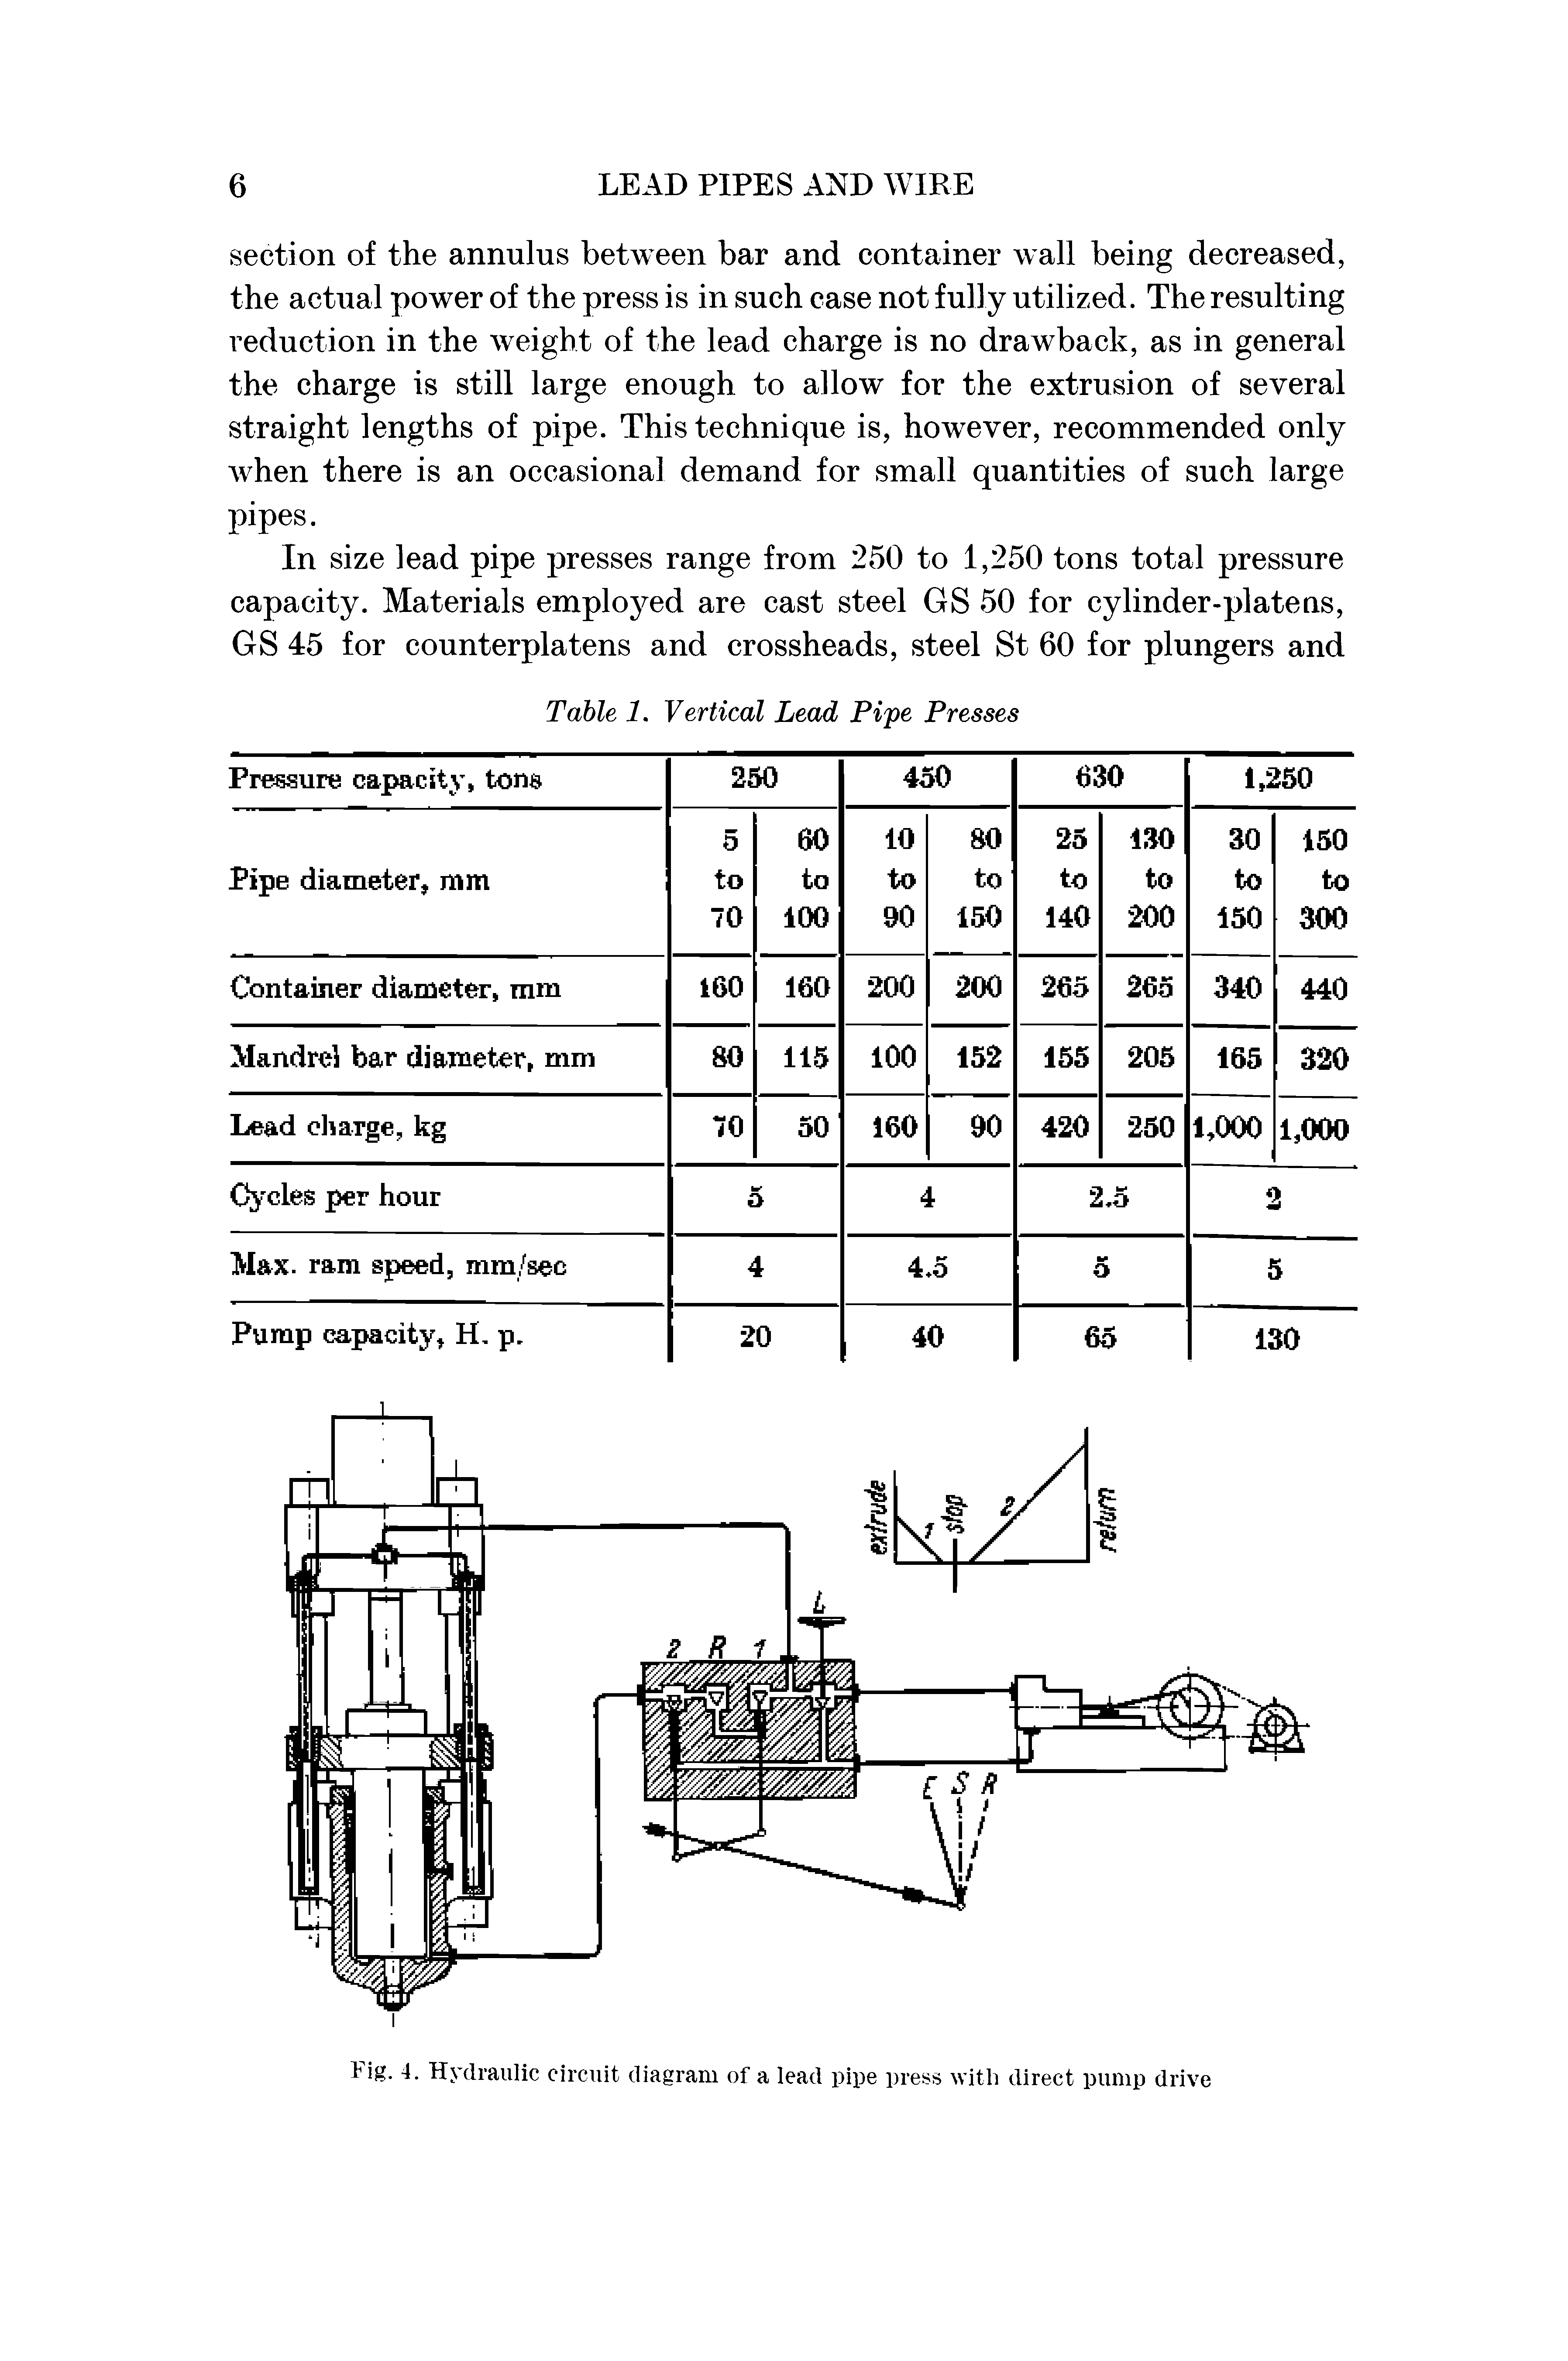 Fig. 4. Hydraulic circuit diagram of a lead pipe press with tlirect pump drive...